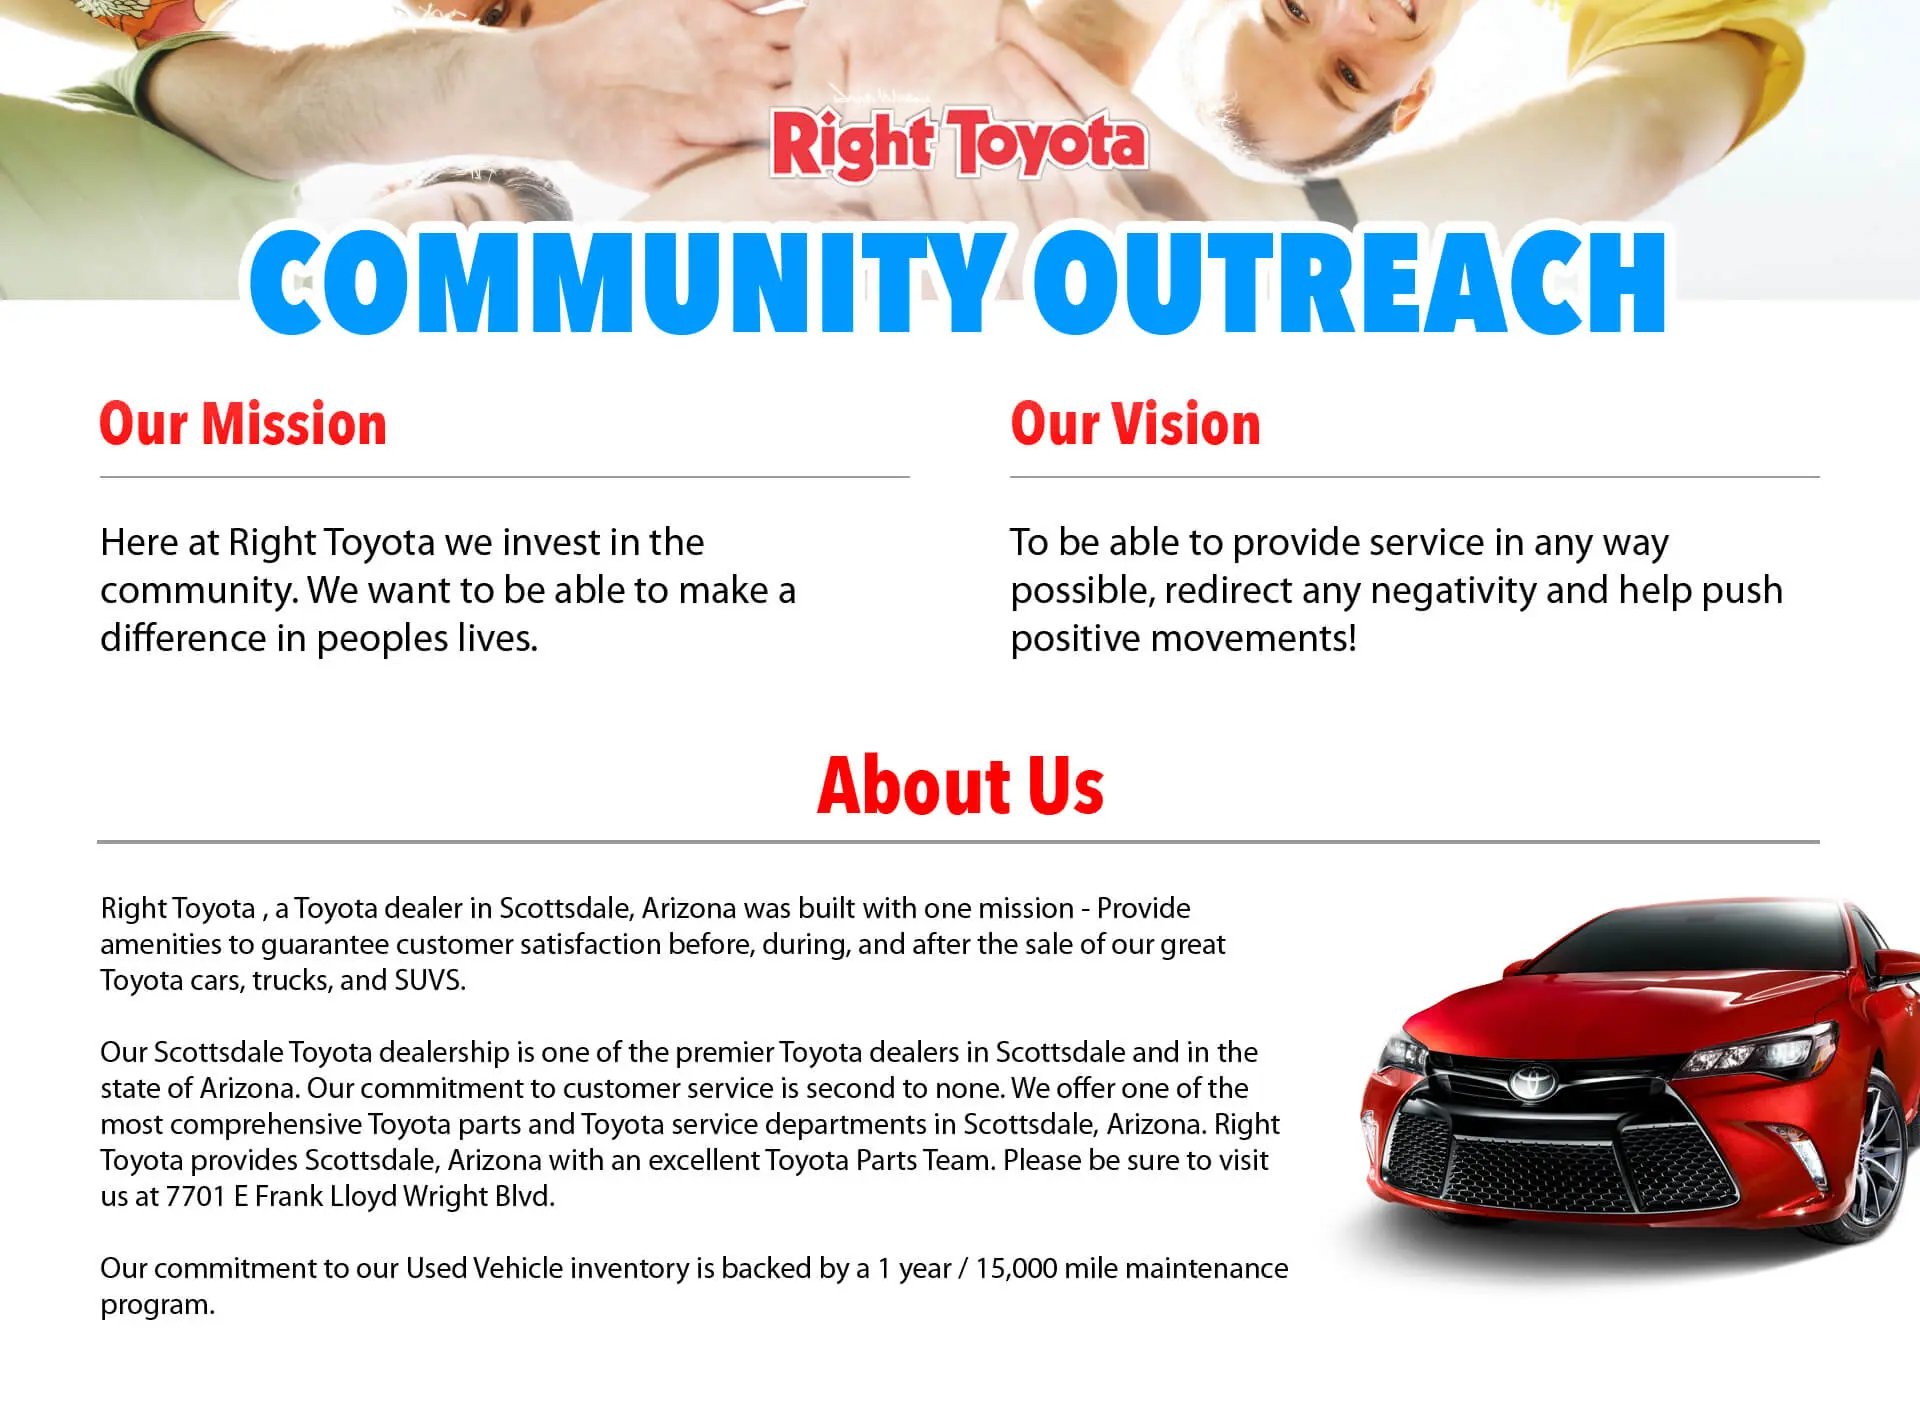 Communnity outreach information img